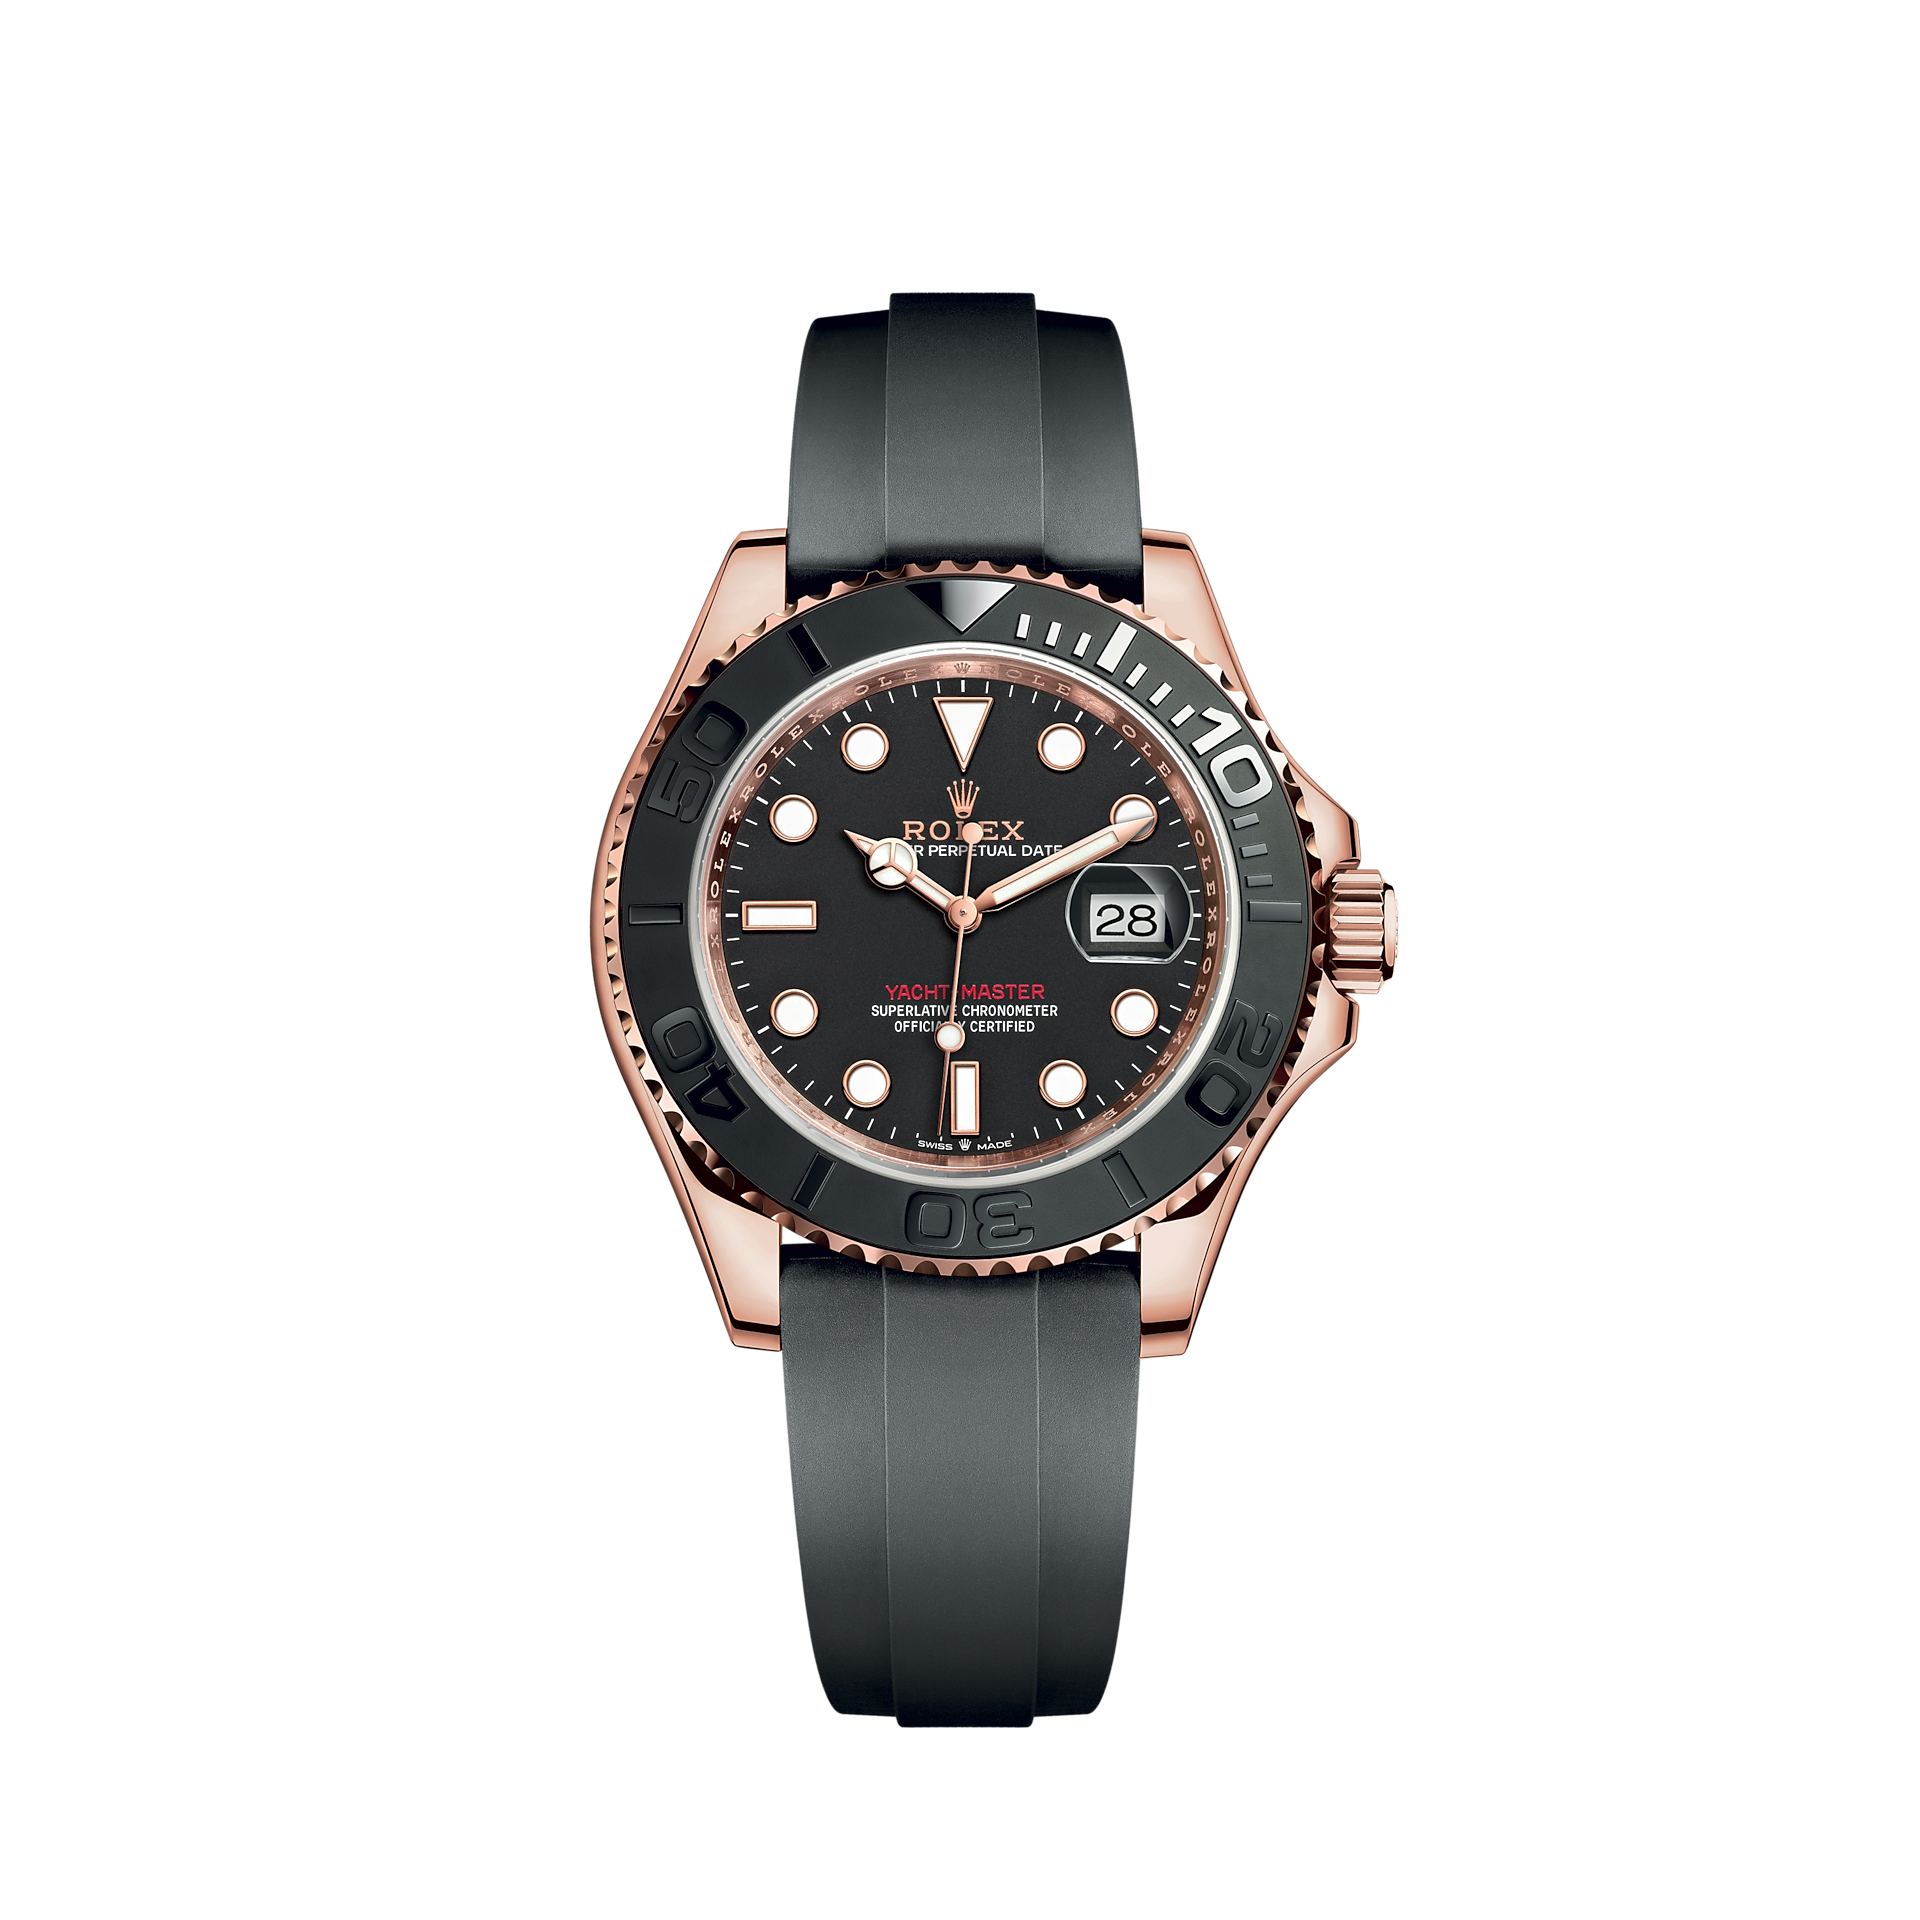 Rolex-yacht-master-18k-rose-gold - Esther Phelps Buzz